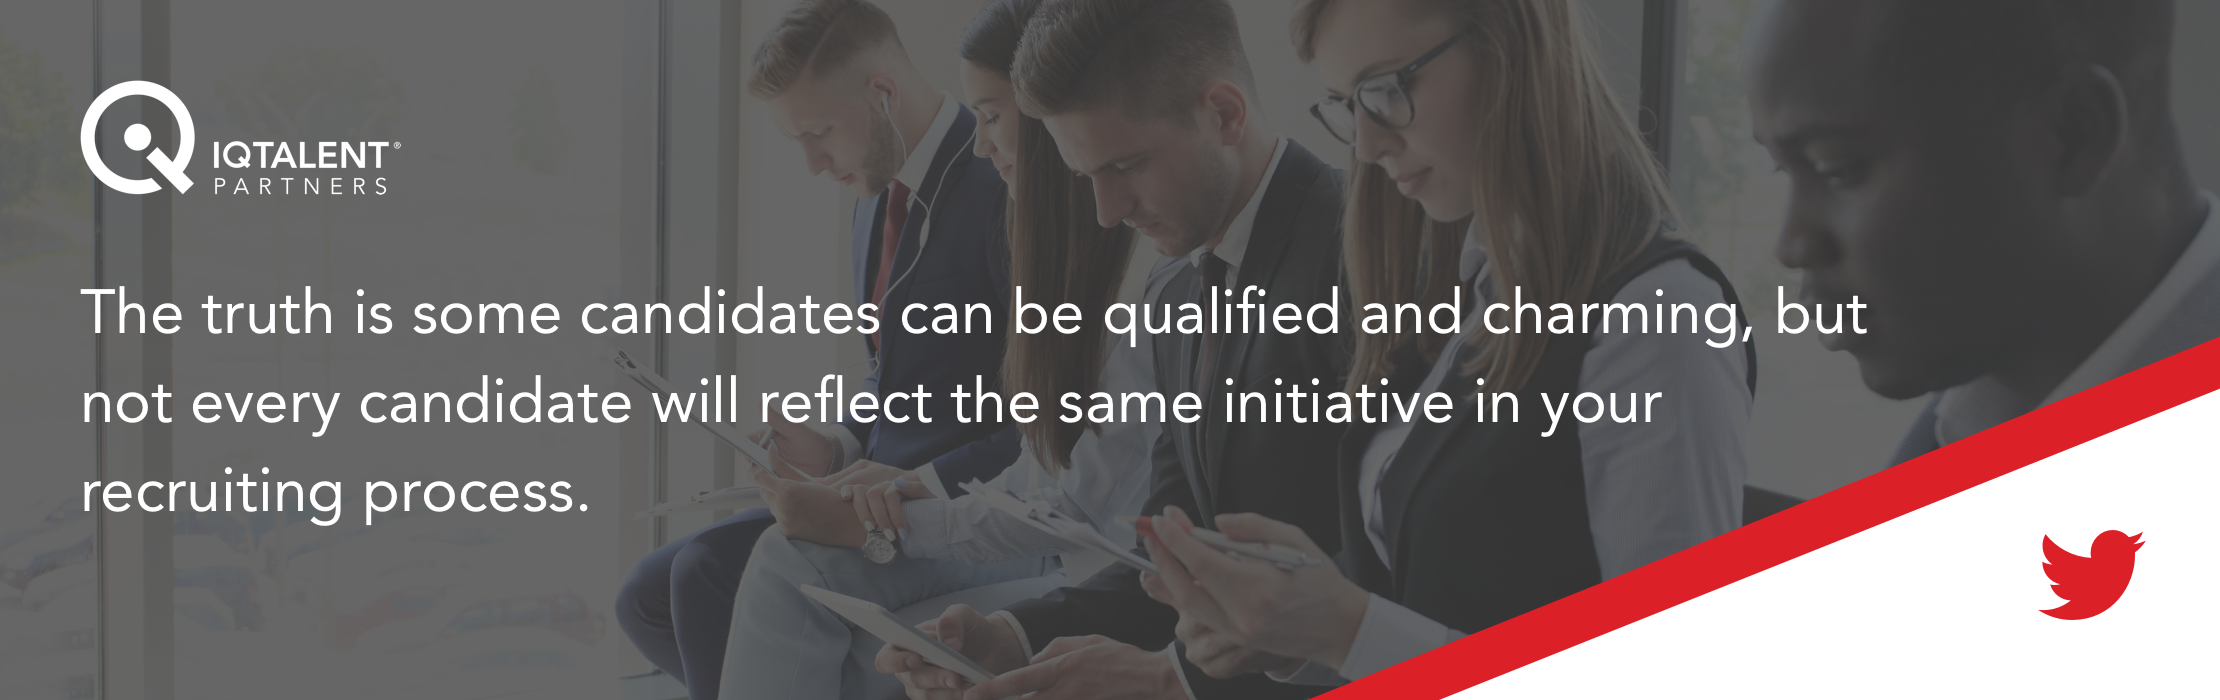 The truth is some candidates can be qualified and charming, but not every candidate will reflect the same initiative in your recruiting process.